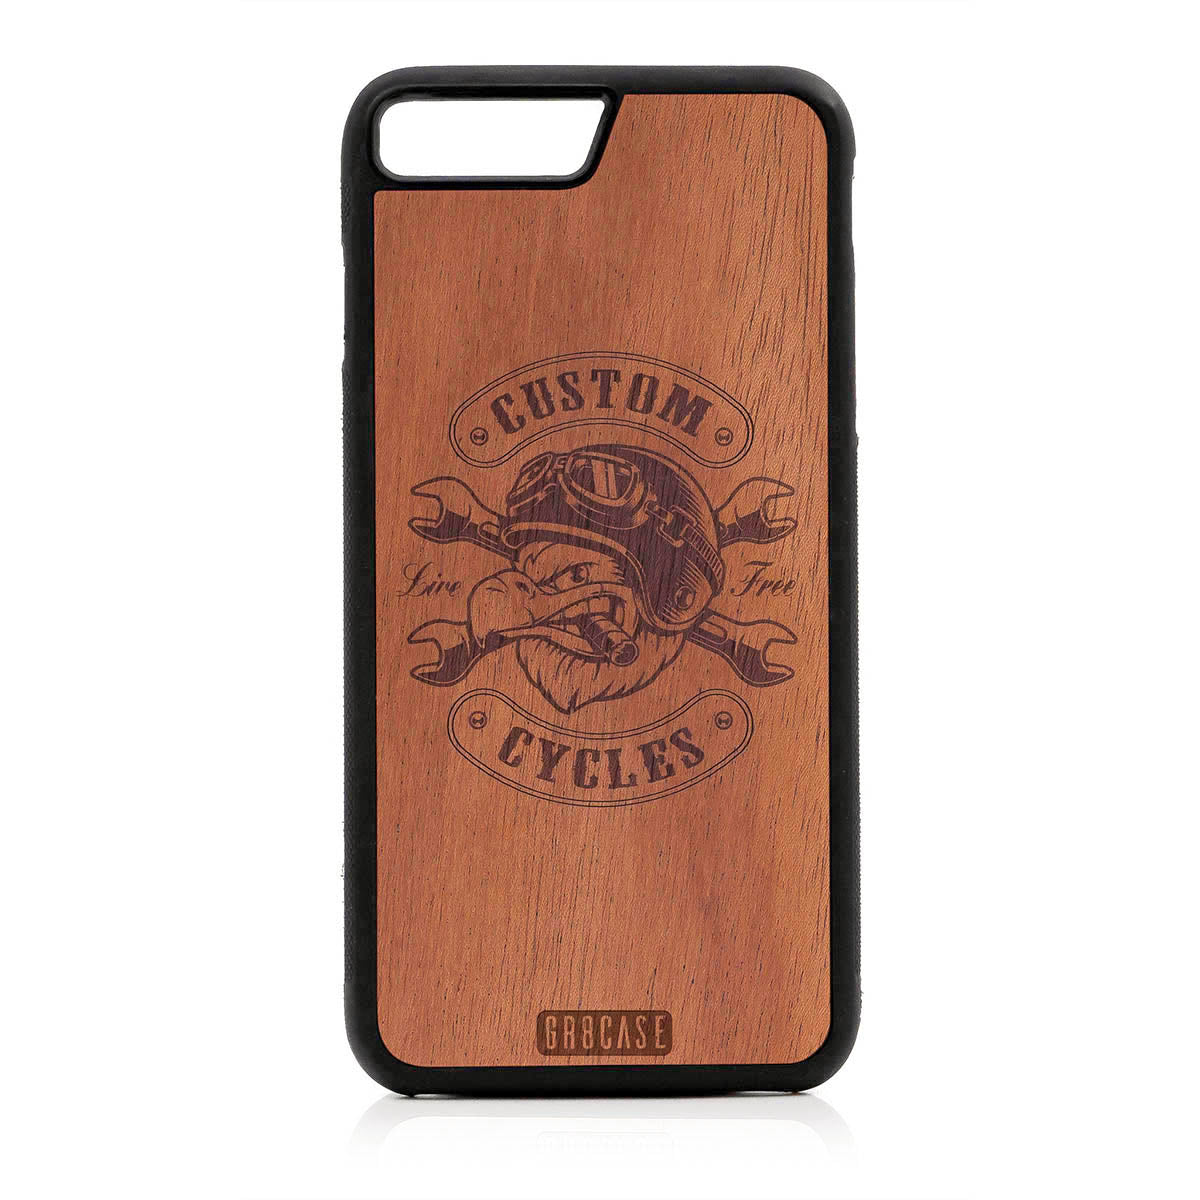 Custom Cycles Live Free (Biker Eagle) Design Wood Case For iPhone 7 Plus / 8 Plus by GR8CASE